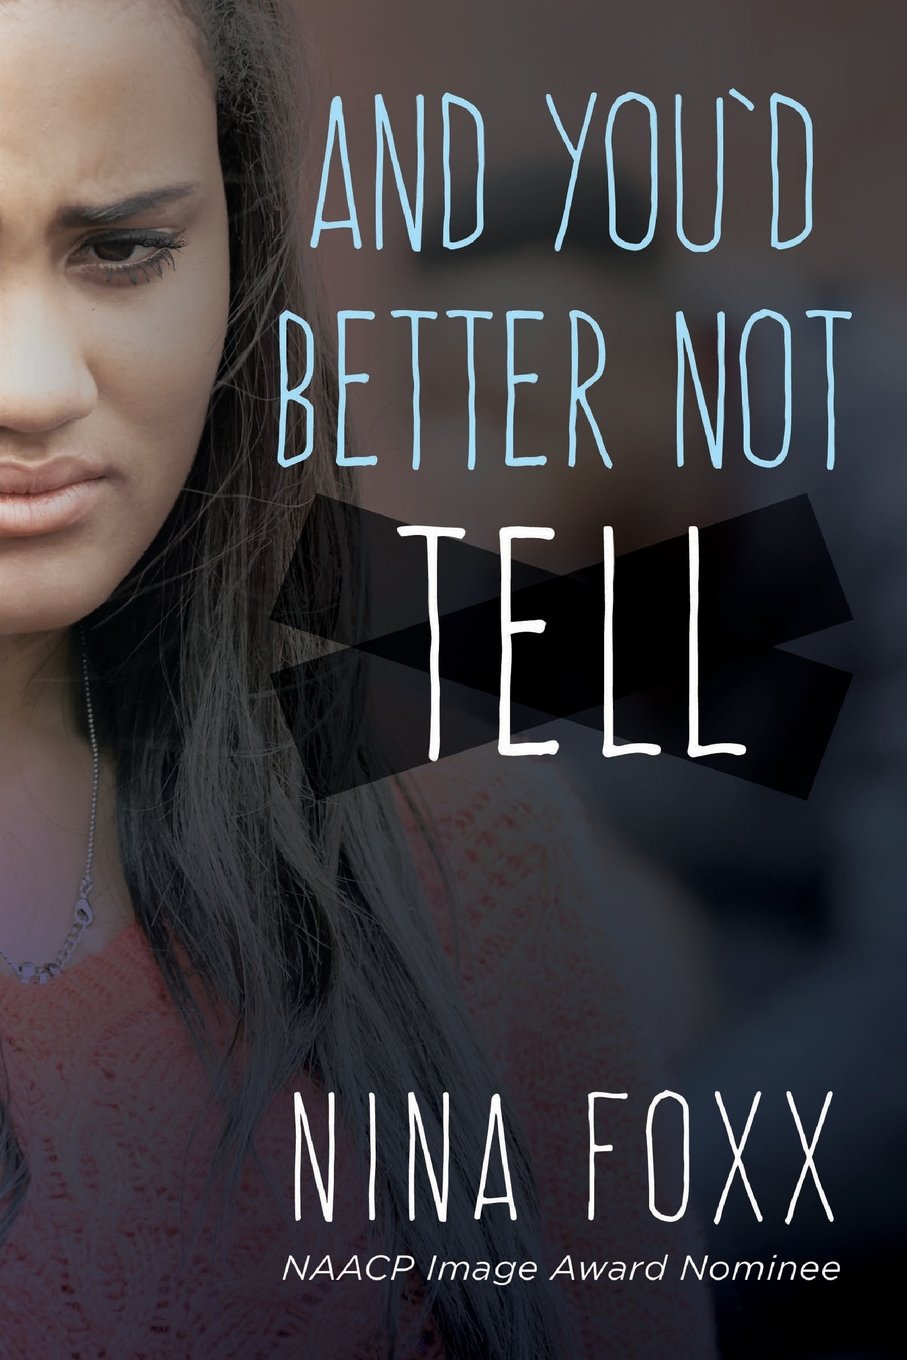 And Youd Better Not Tell by Nina Foxx dyYEQTL